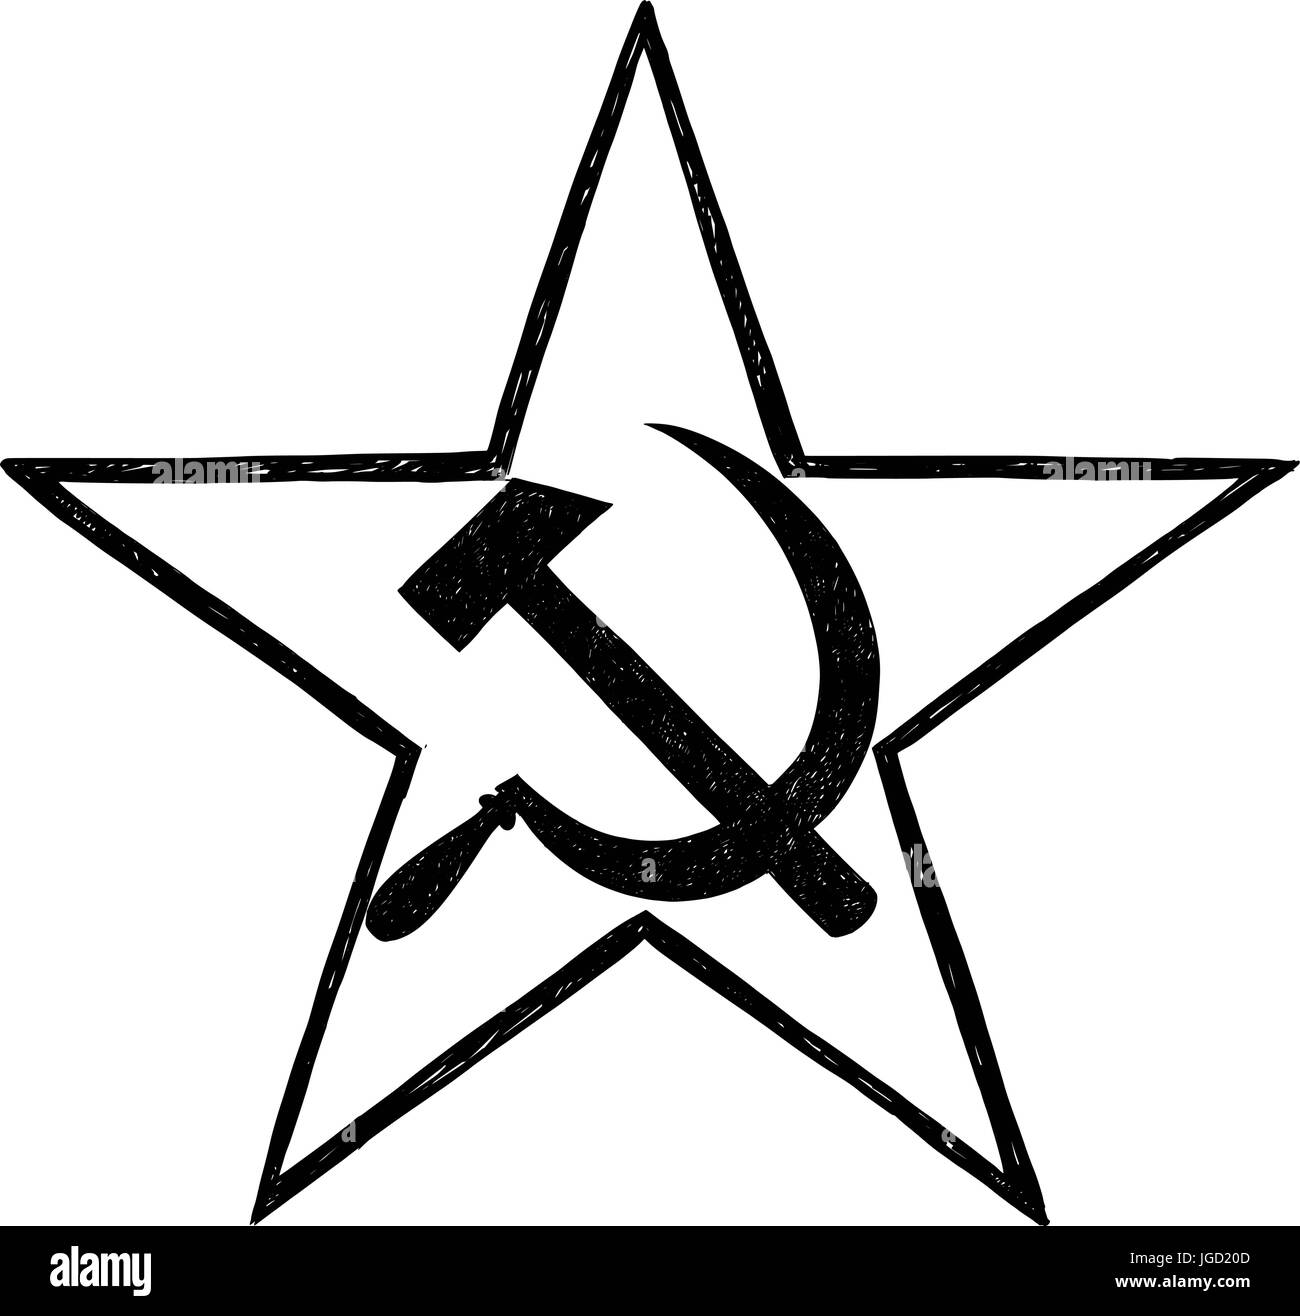 Hammer and sickle inside star- symbol of communism and Soviet Union Stock Vector